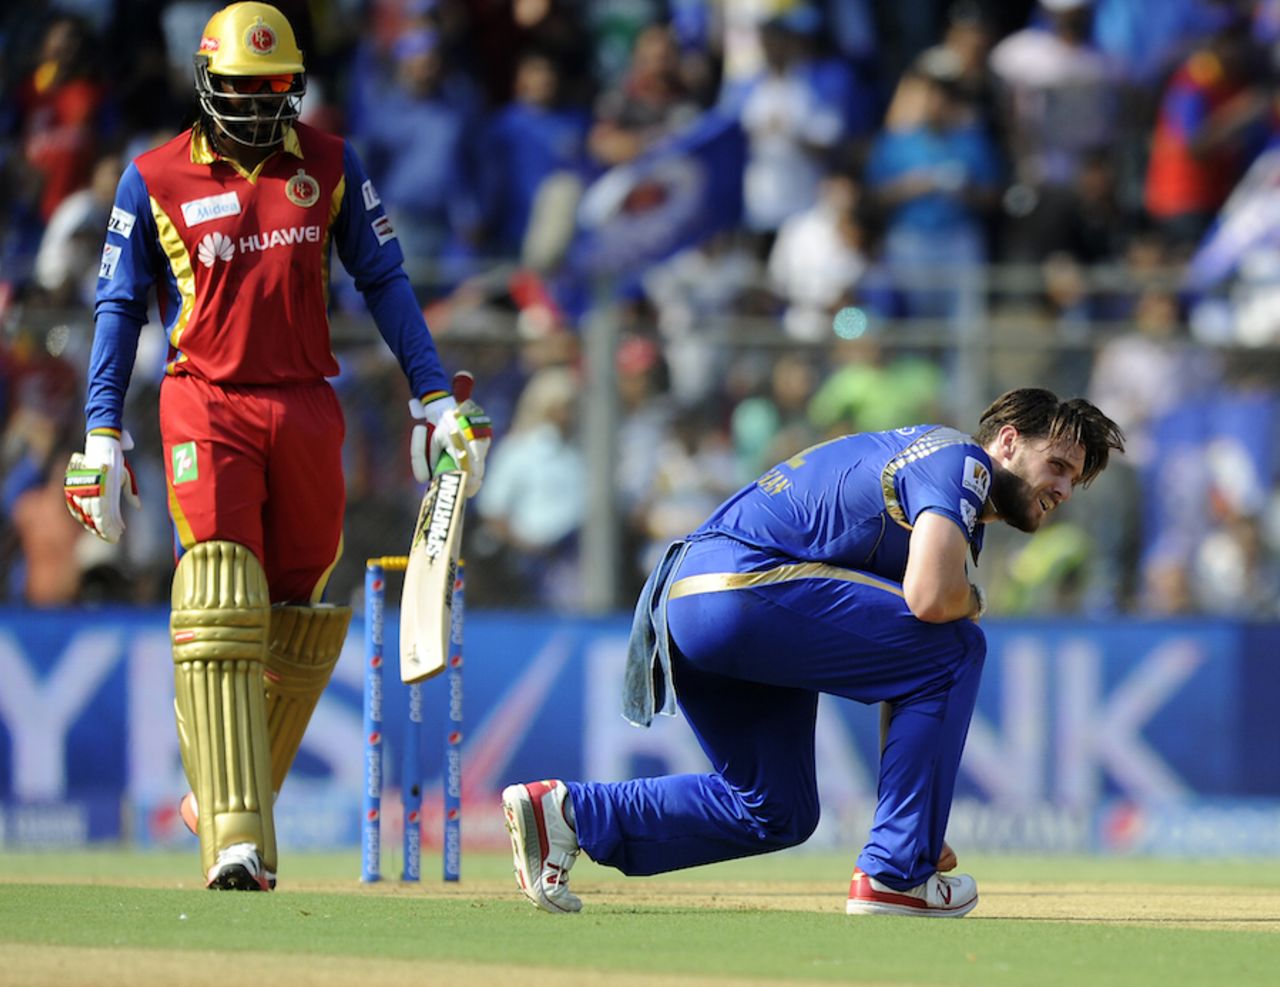 Mitchell McClenaghan was in despair after Rohit Sharma dropped Chris Gayle off his bowling, Mumbai Indians v Royal Challengers Bangalore, IPL 2015, Mumbai, May 10, 2015